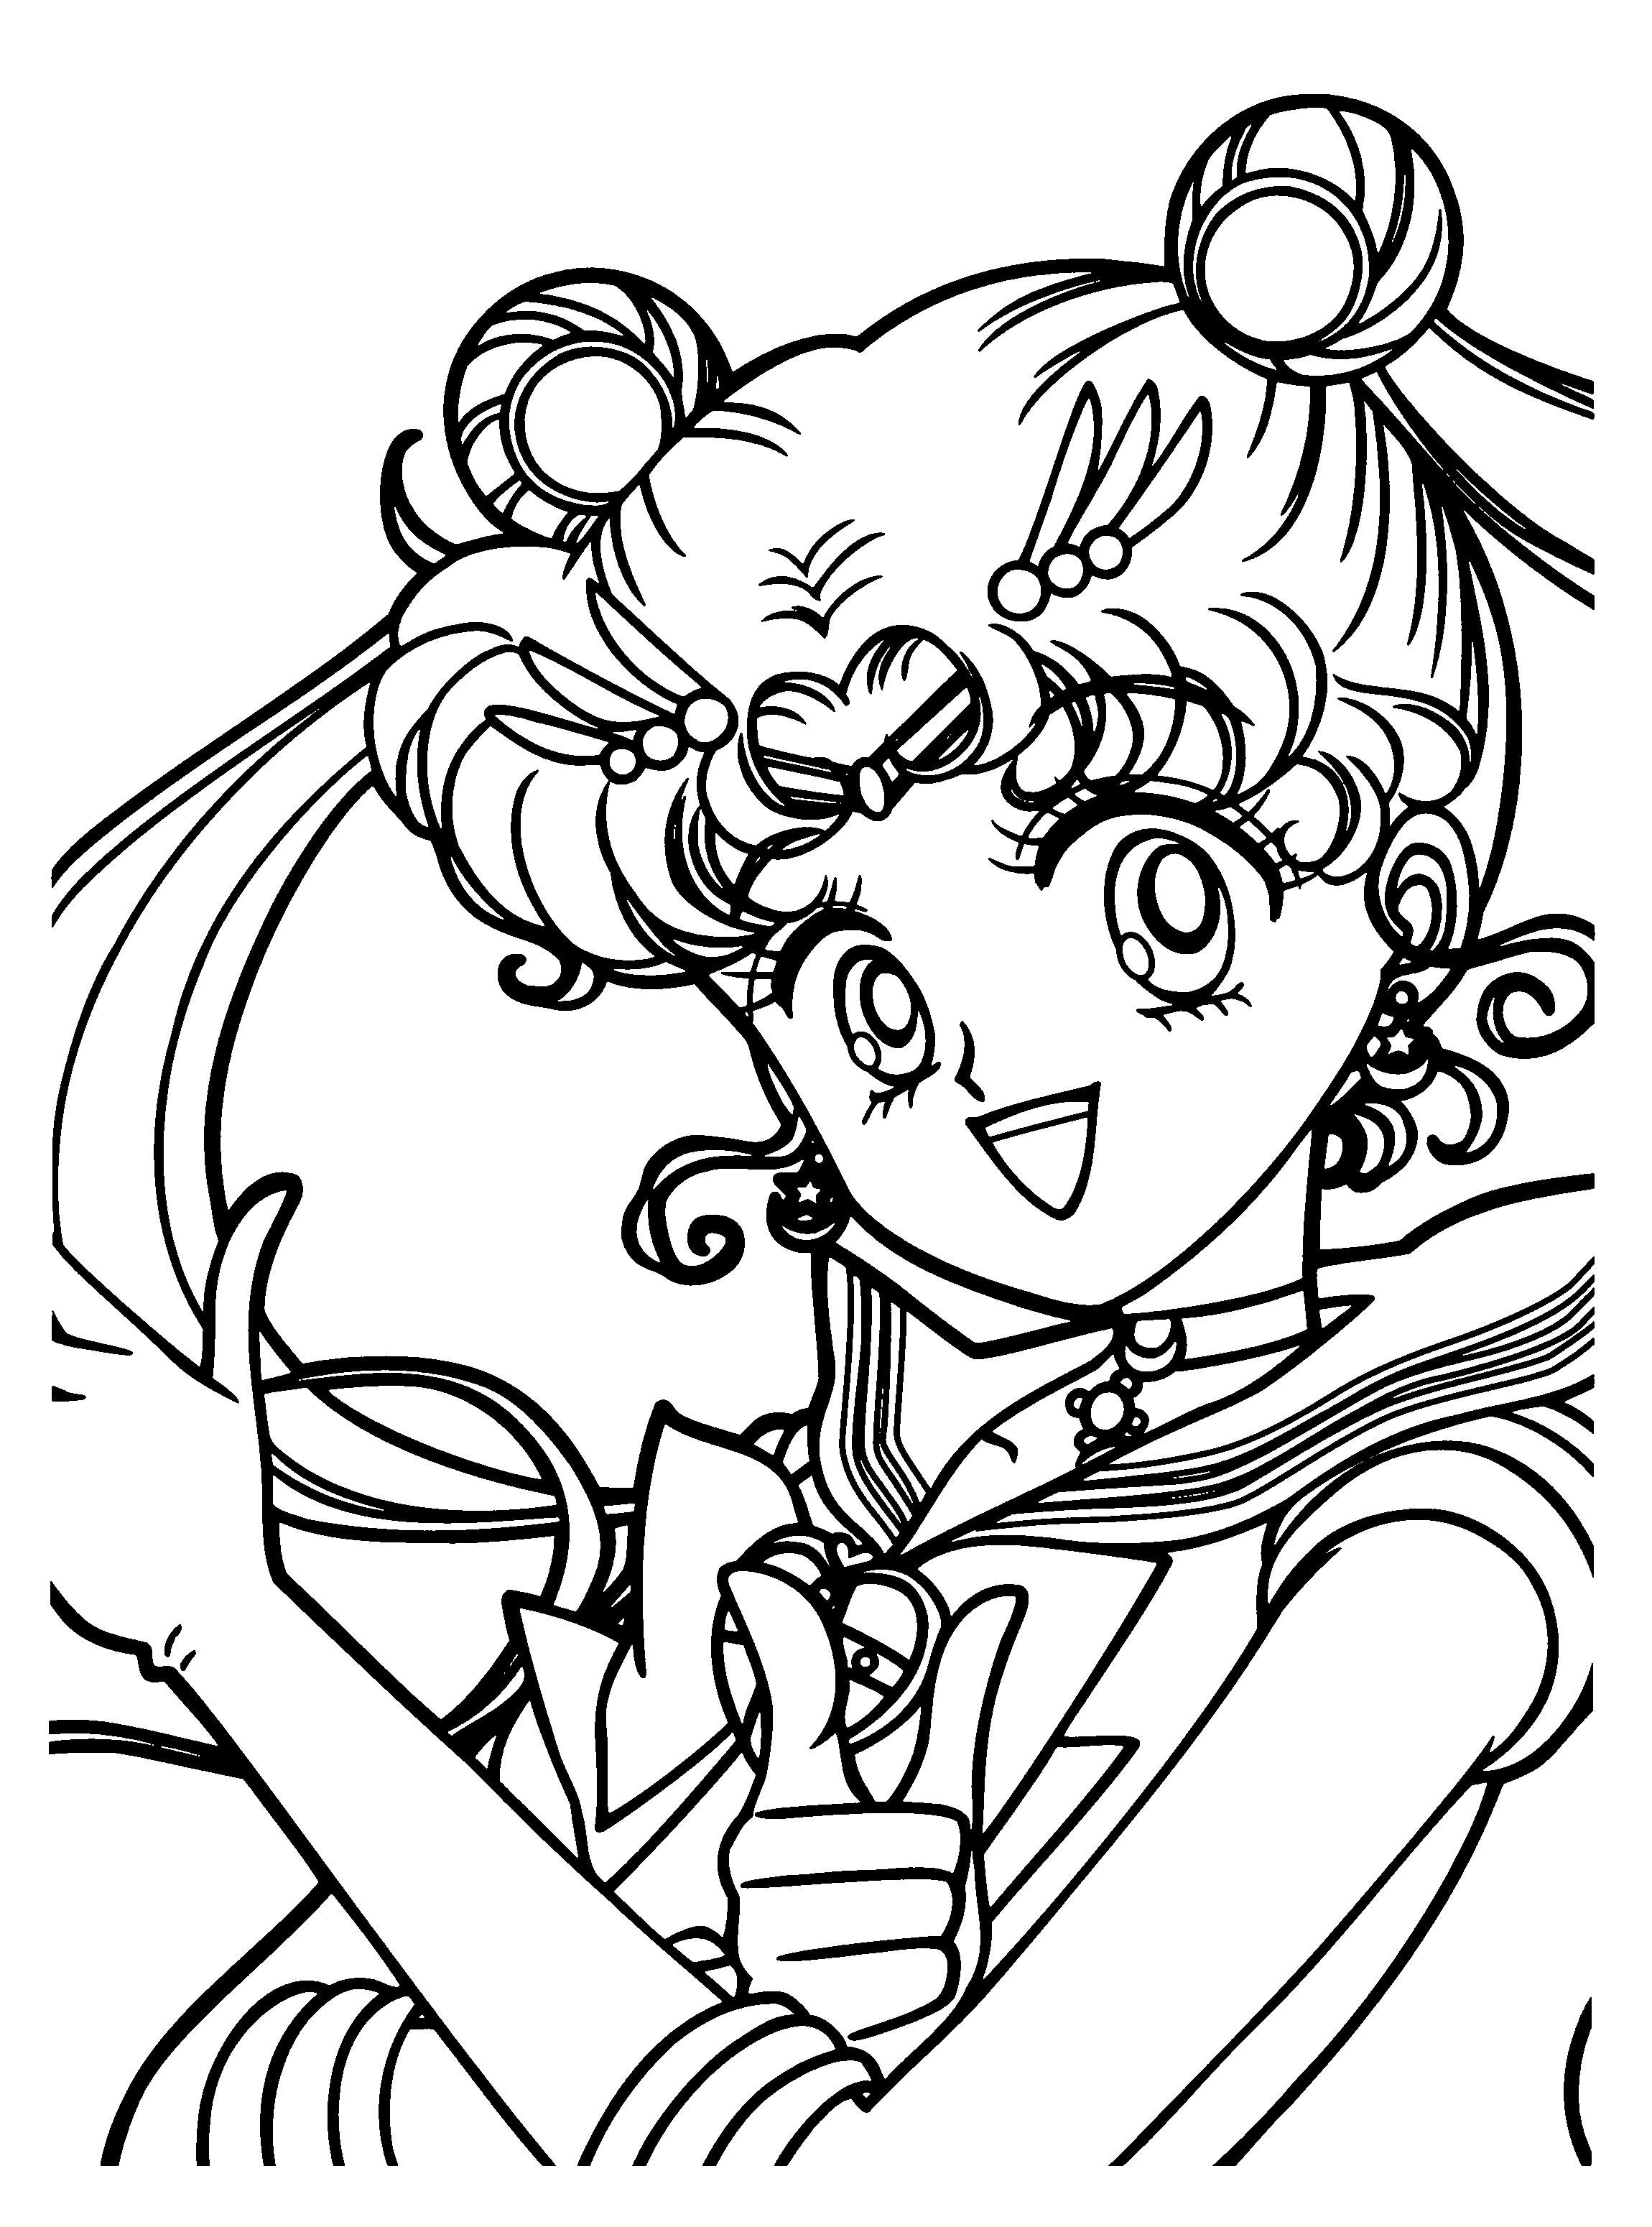 animated-coloring-pages-sailor-moon-image-0087